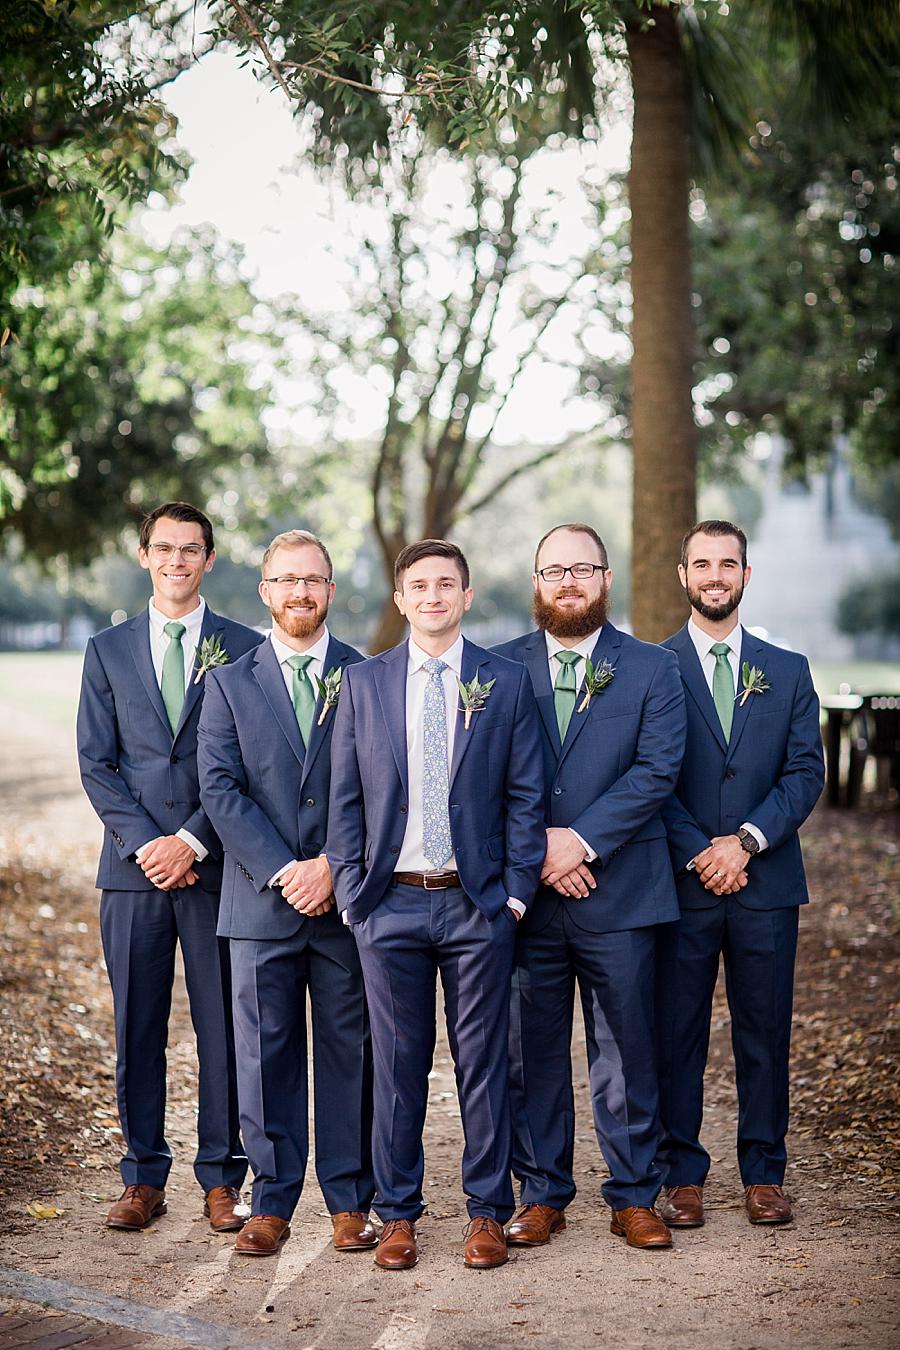 Just the guys at this Upstairs at Midtown Wedding by Knoxville Wedding Photographer, Amanda May Photos.